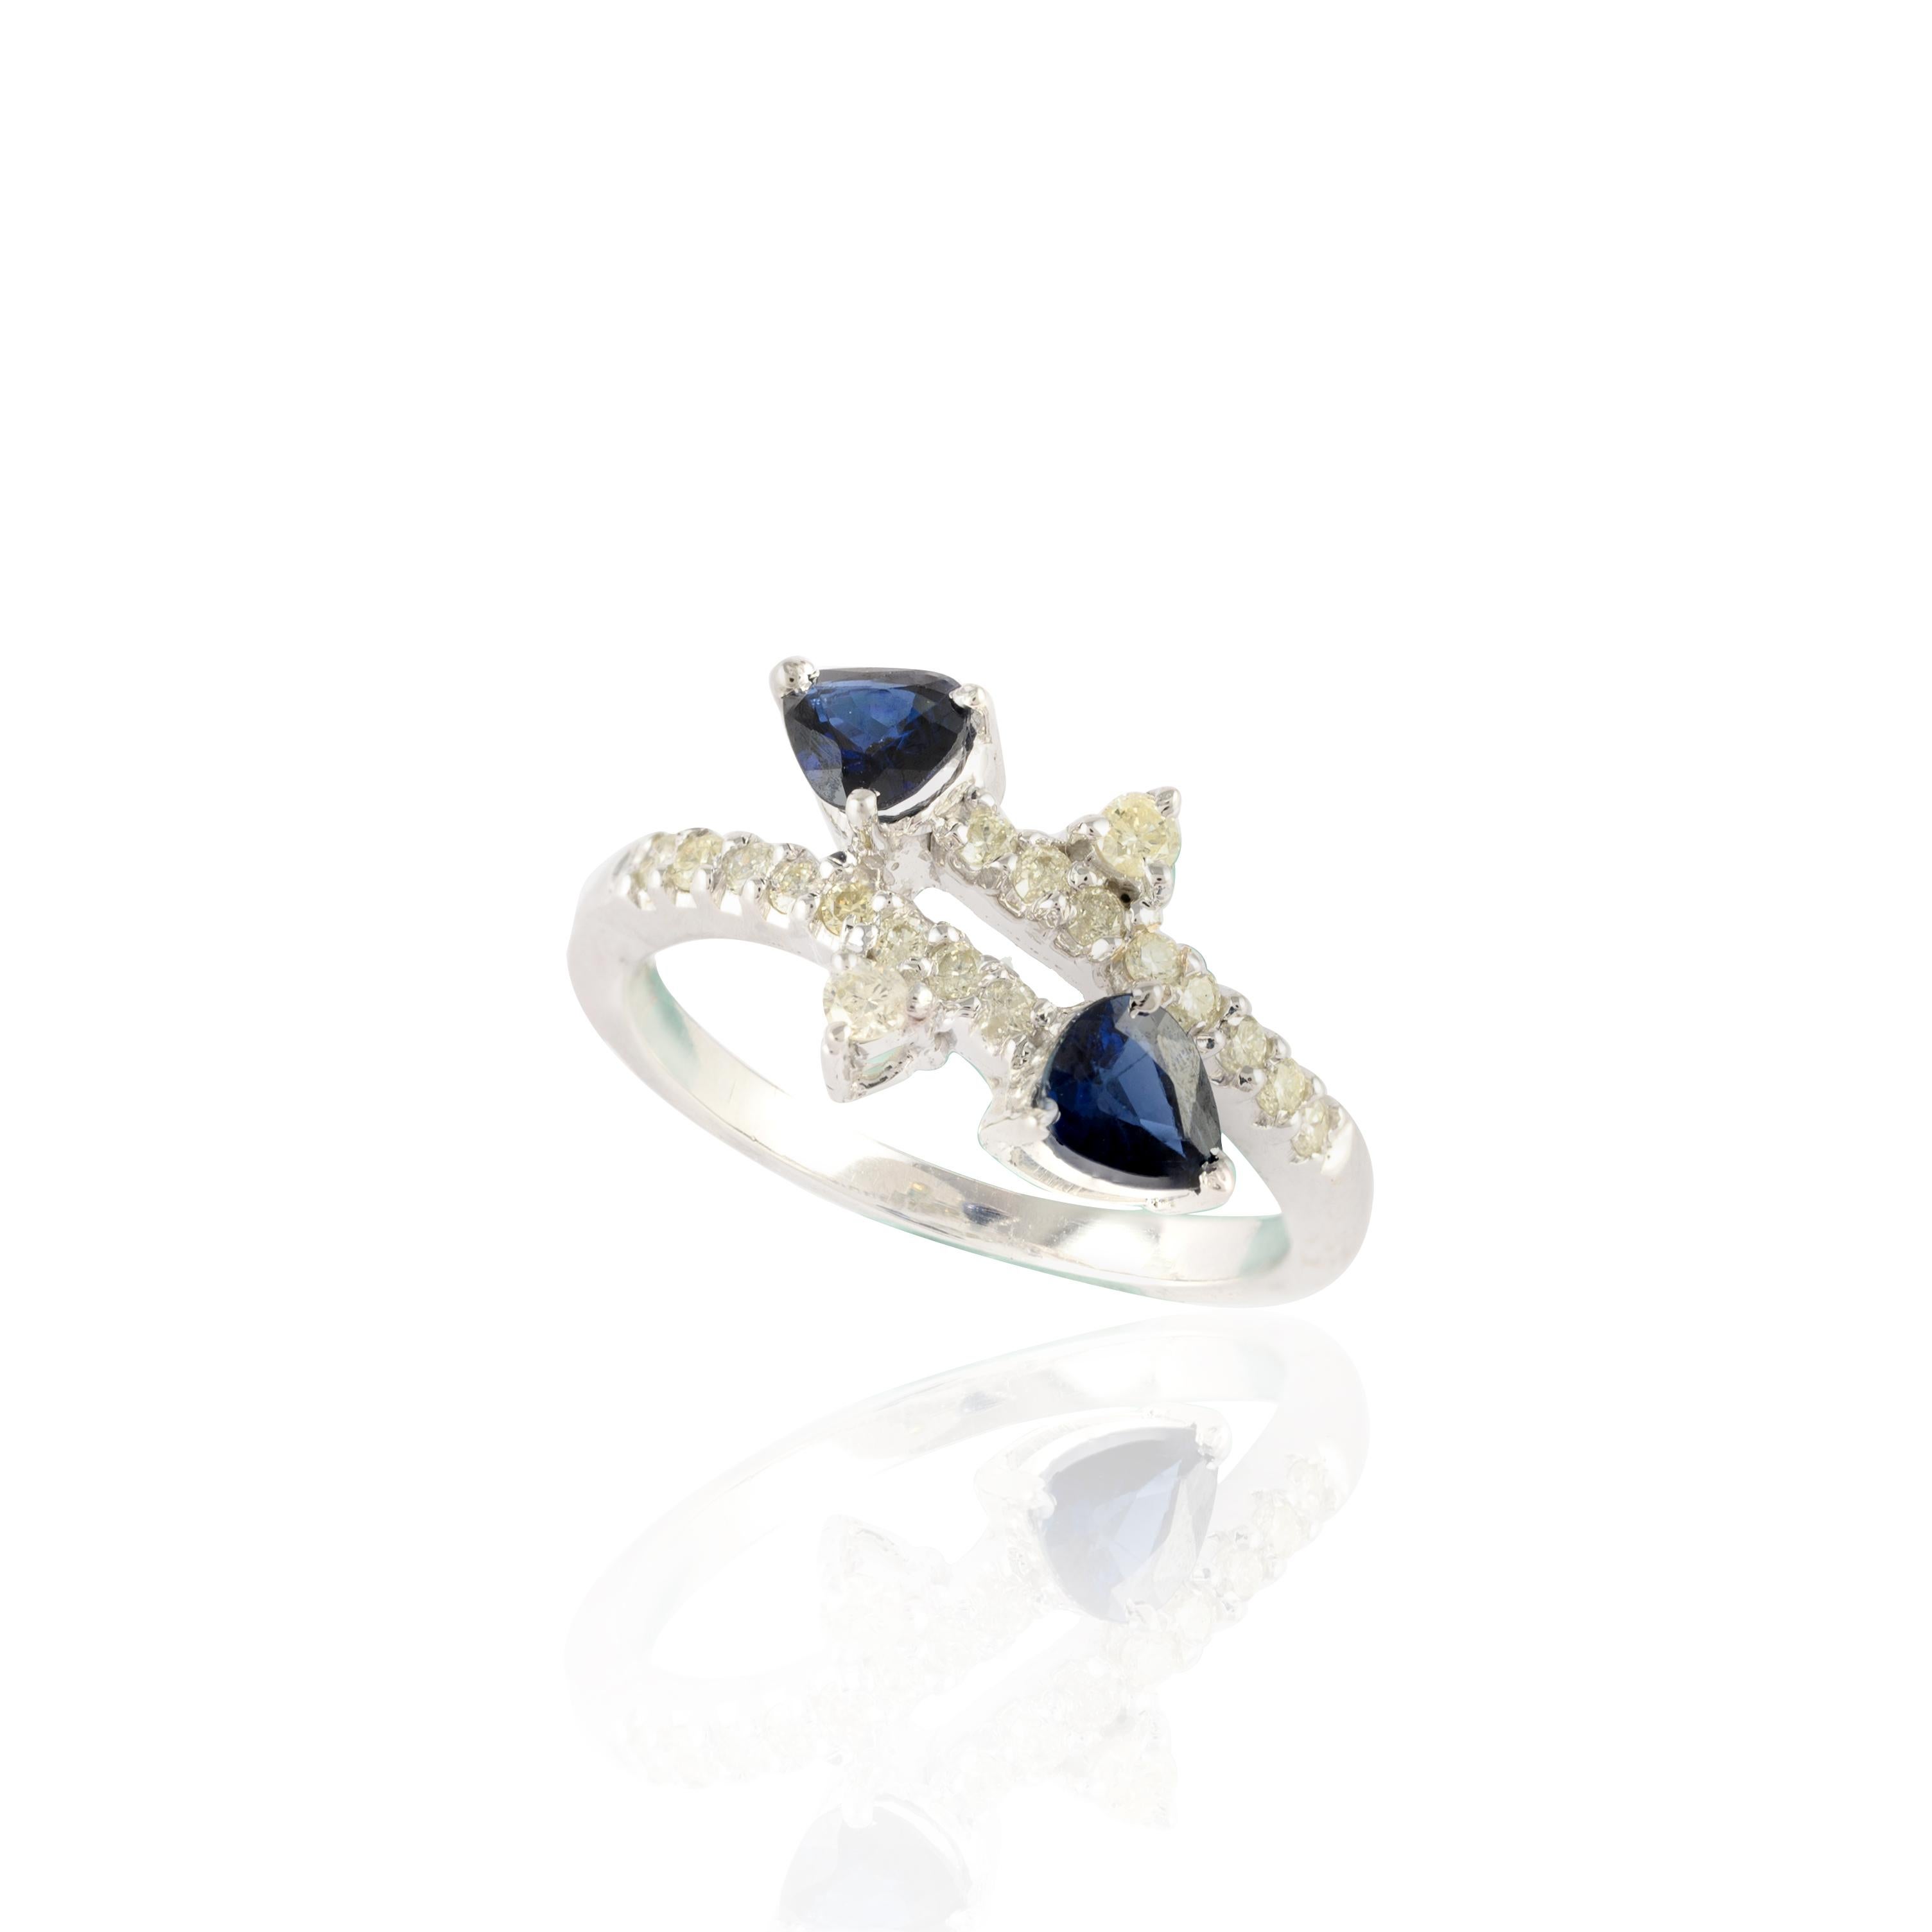 For Sale:  Minimalist Blue Sapphire Diamond Ring in 14K Solid White Gold  6